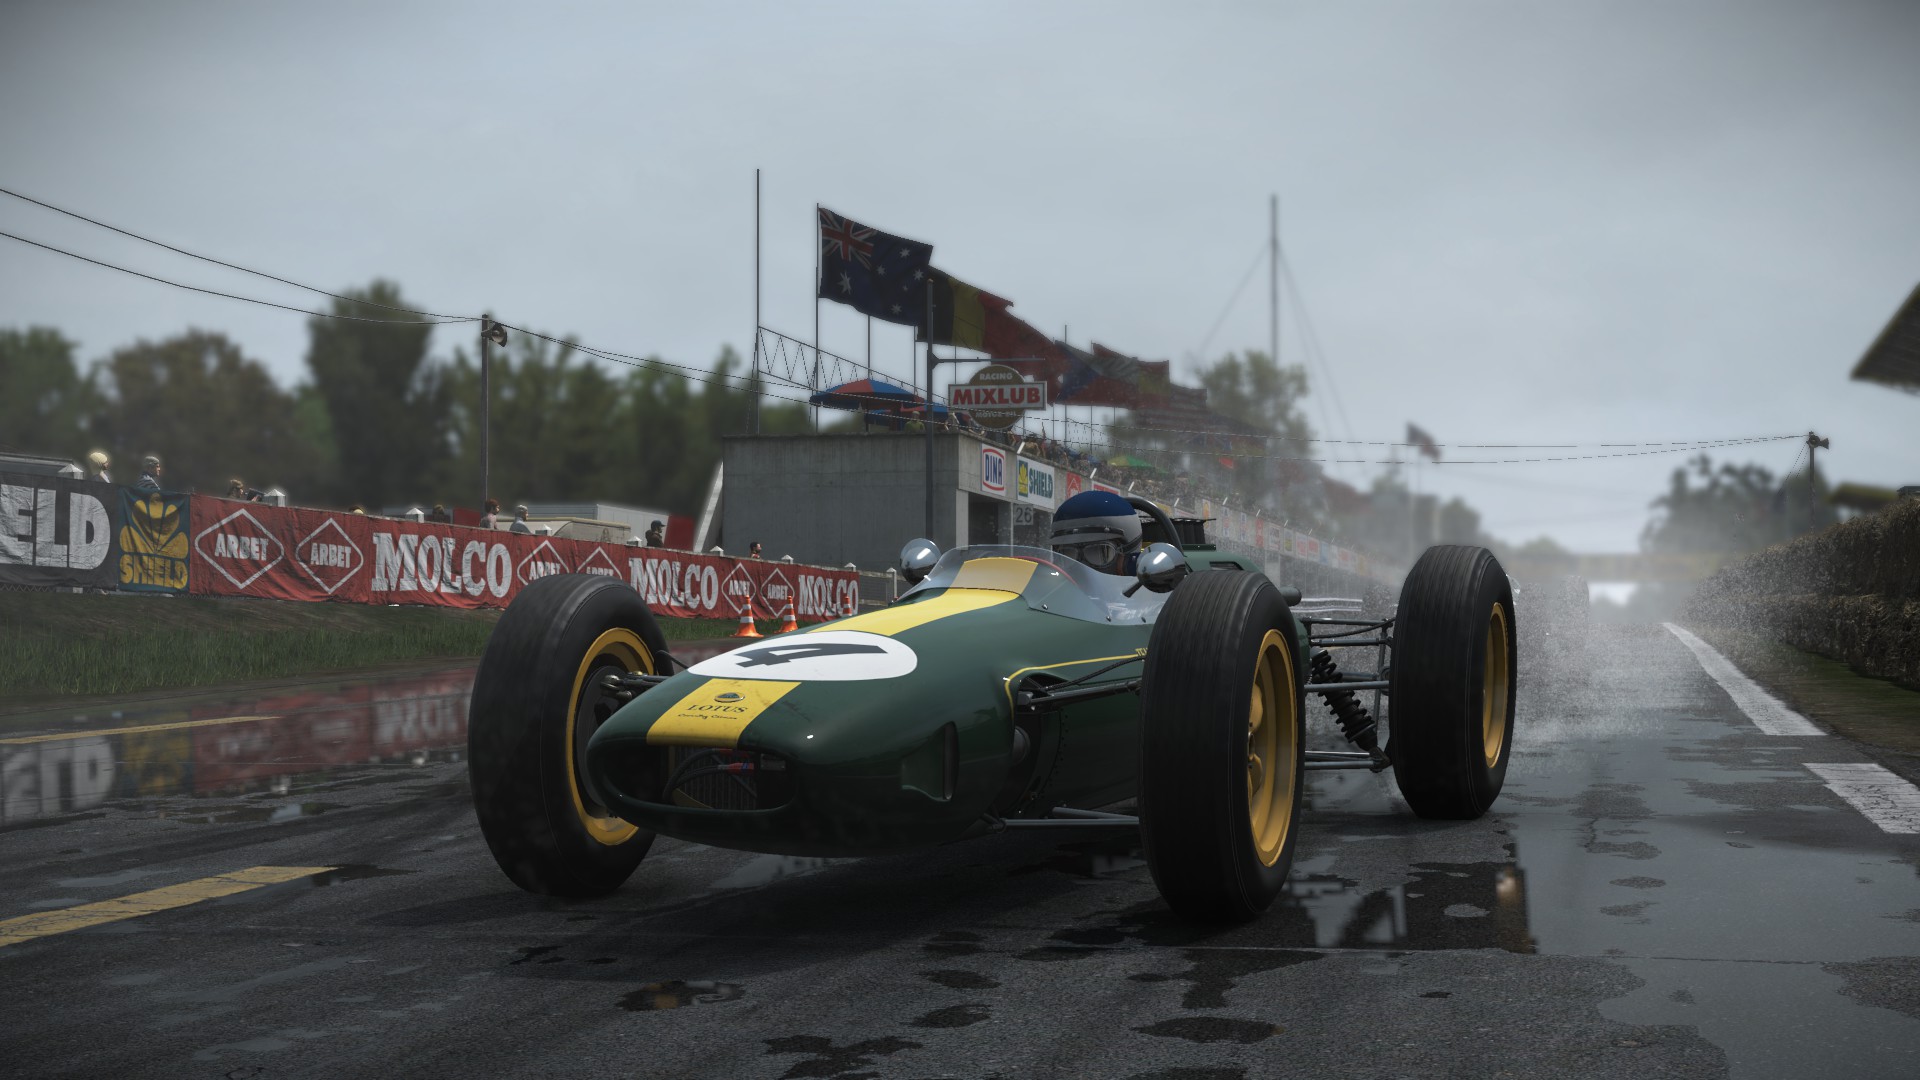 ✅ Project CARS - Classic Lotus Expansion XBOX ONE X|S🔑